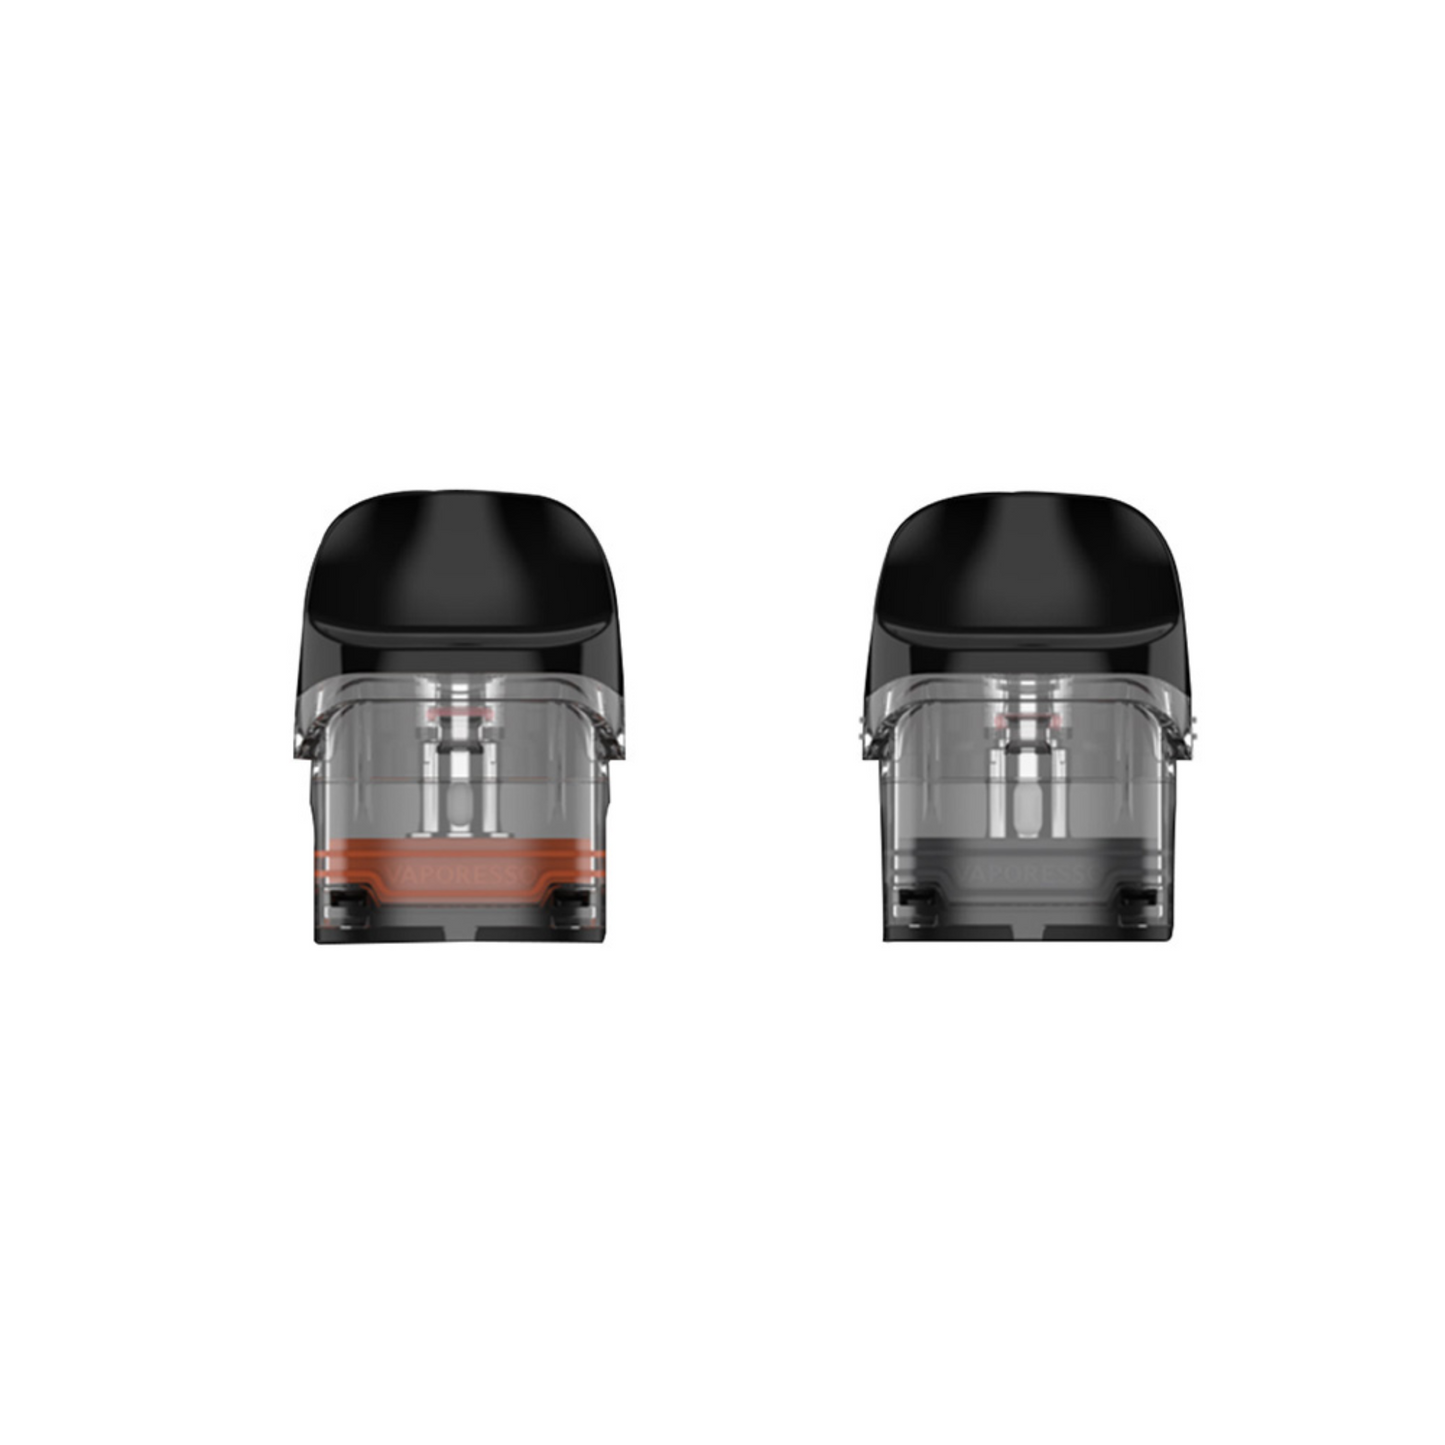 Vaporesso Luxe QS Replacement Pod – 2mL (4-Pack)